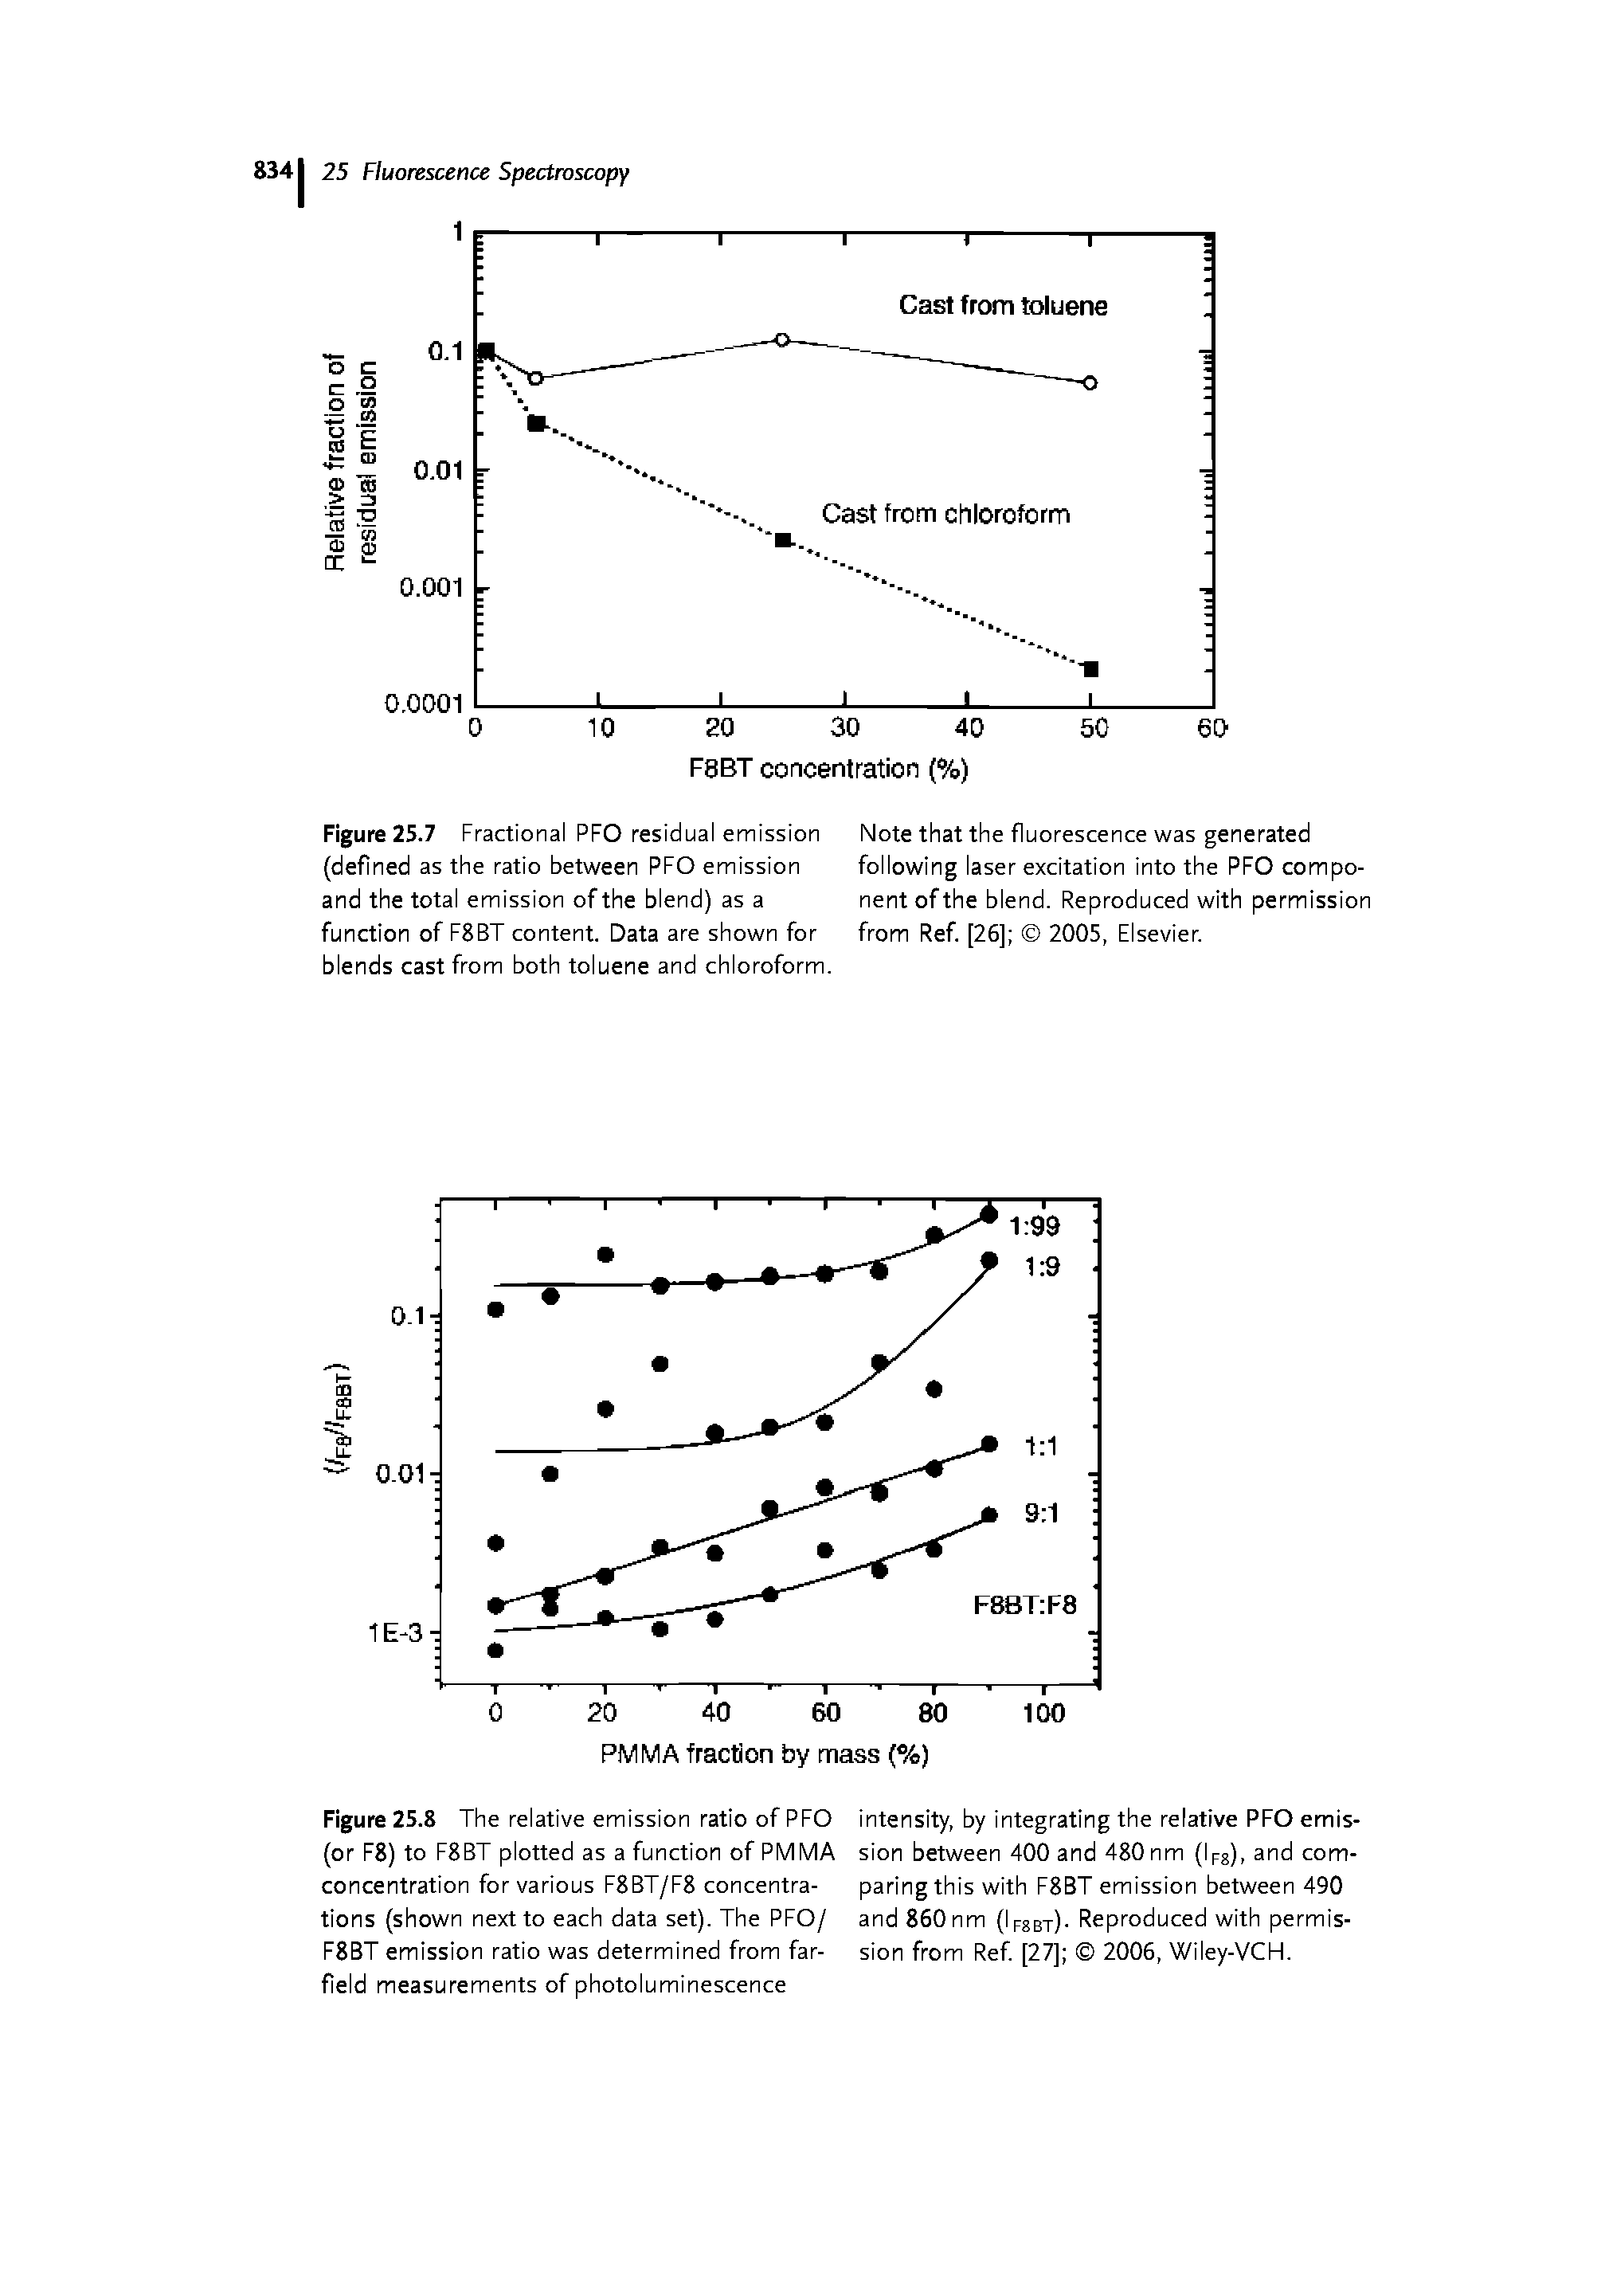 Figure 25.7 Fractional PFO residual emission (defined as the ratio between PFO emission and the total emission of the blend) as a function of F8BT content. Data are shown for blends cast from both toluene and chloroform.